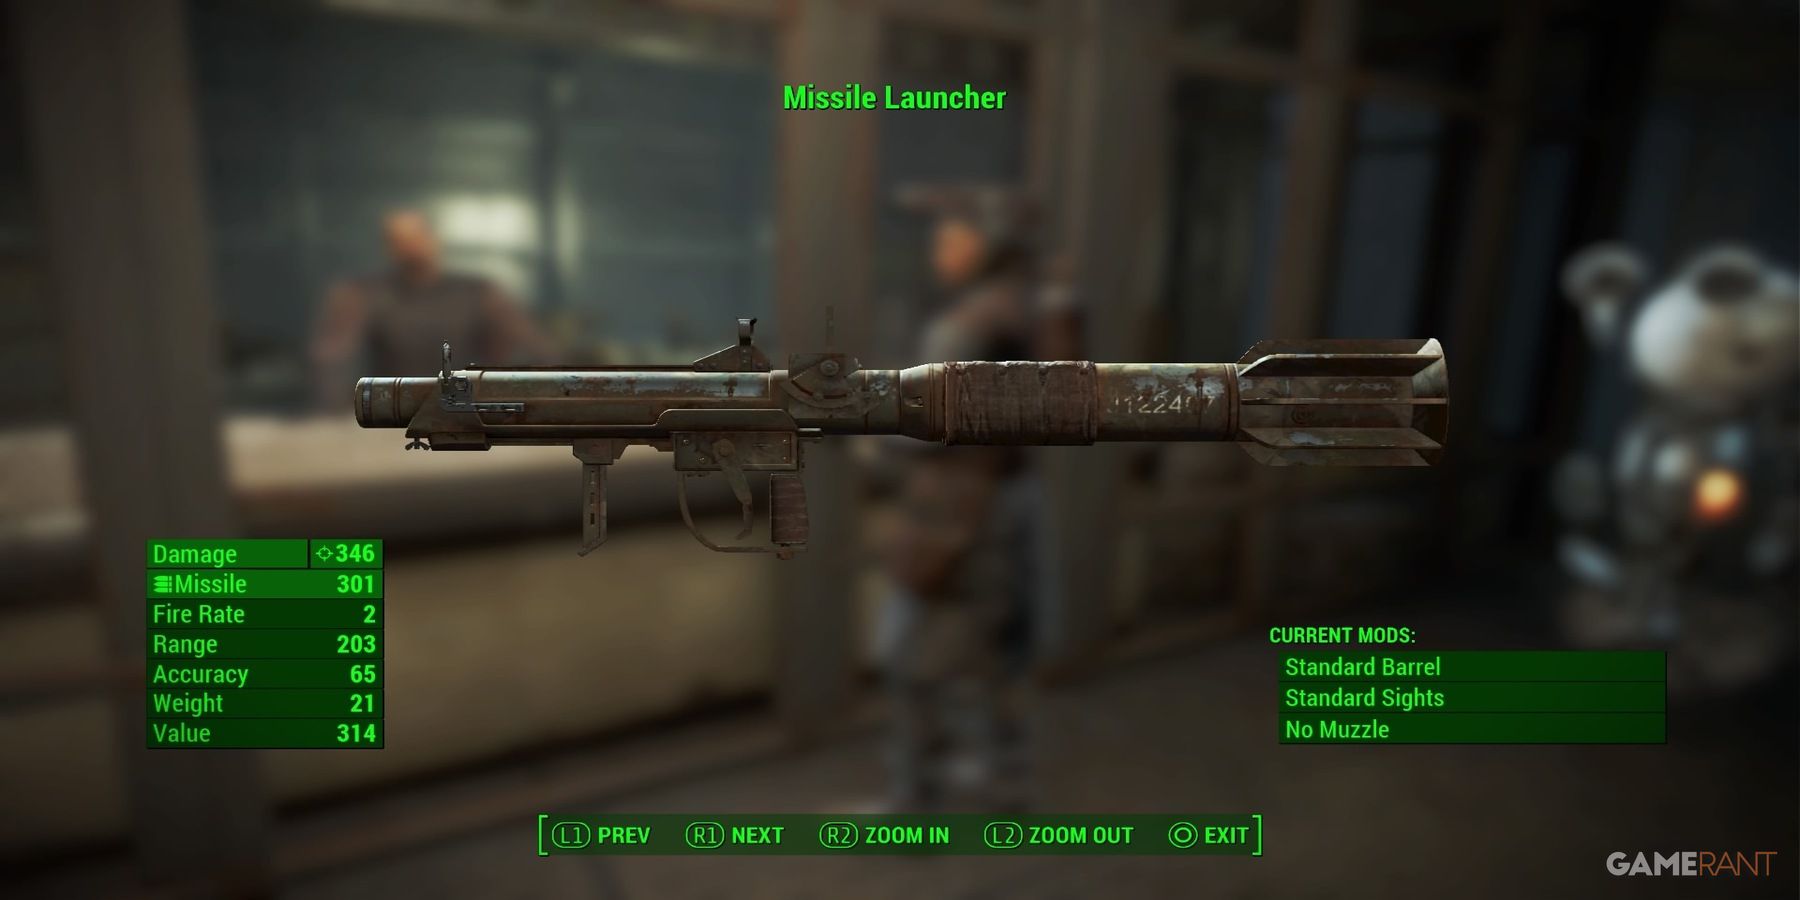 Missile Launcher in Fallout 4